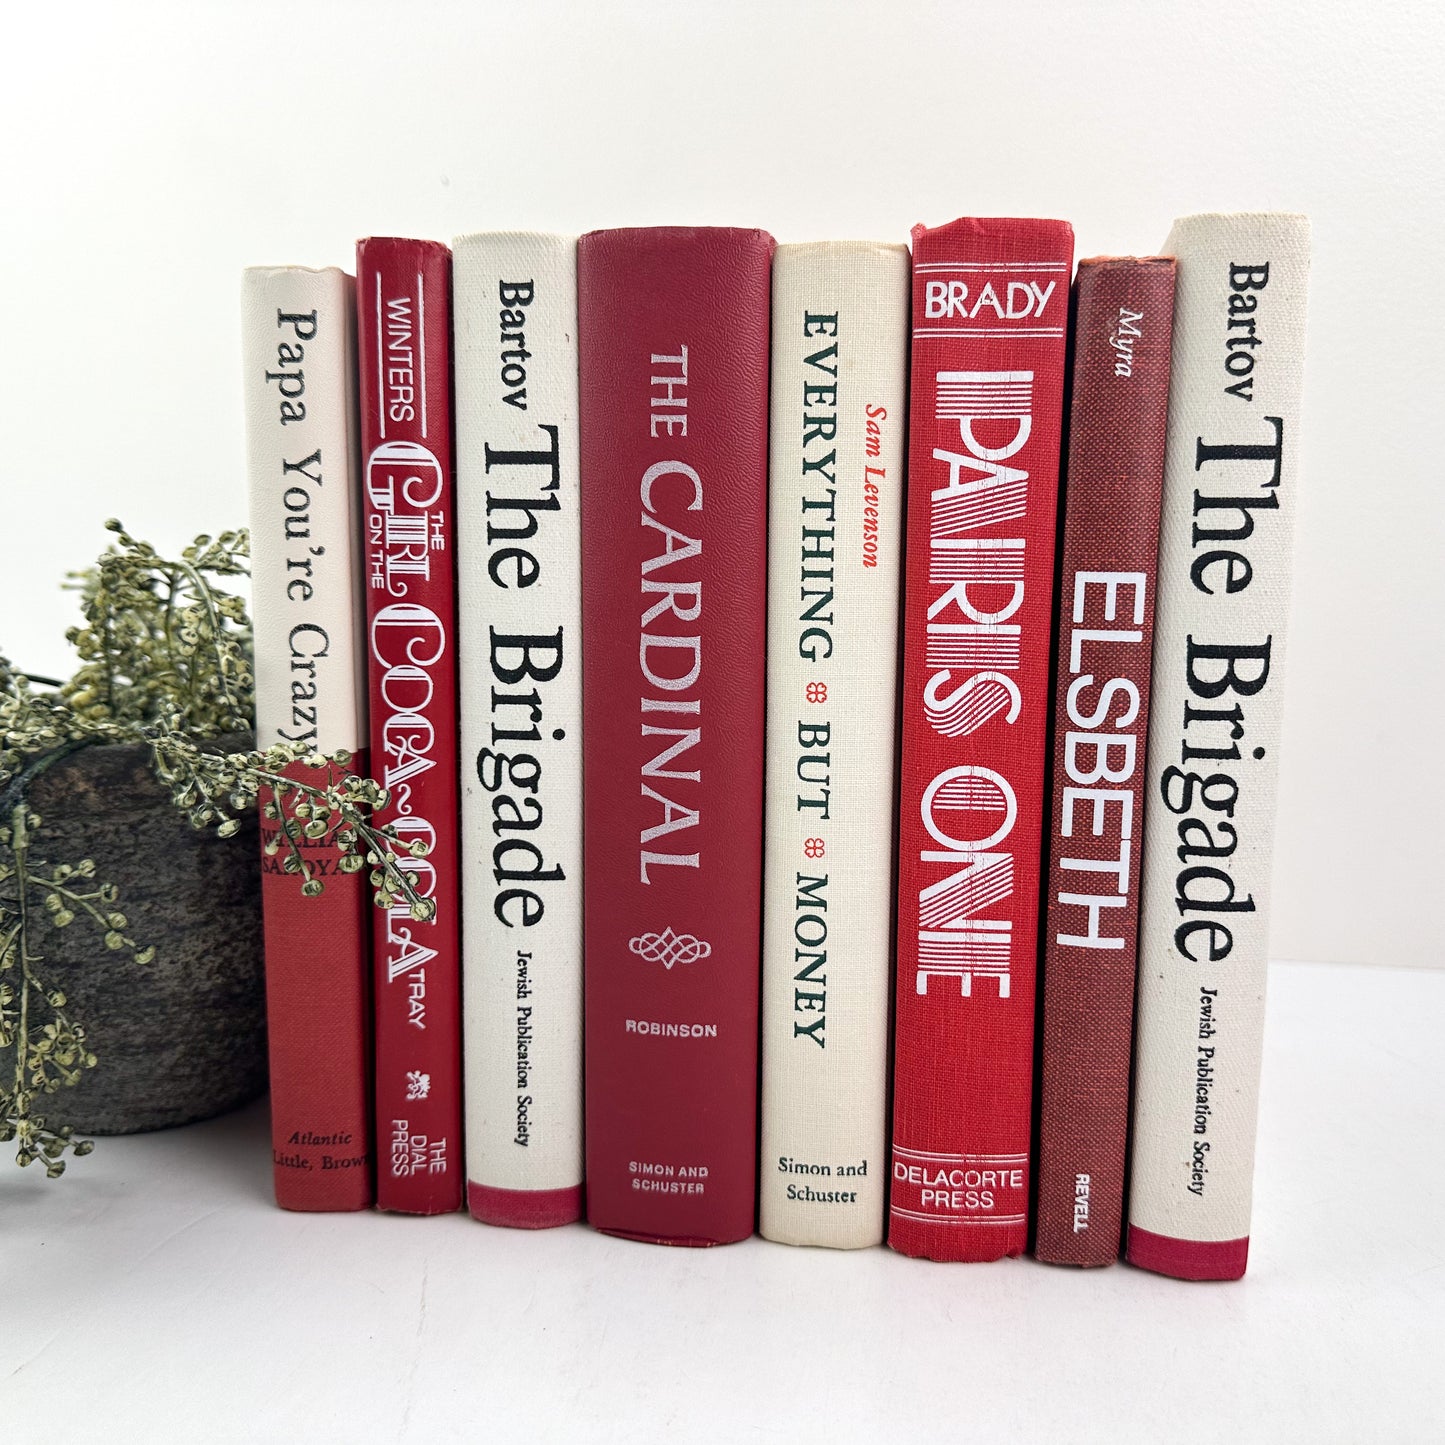 Red and White Books by Color